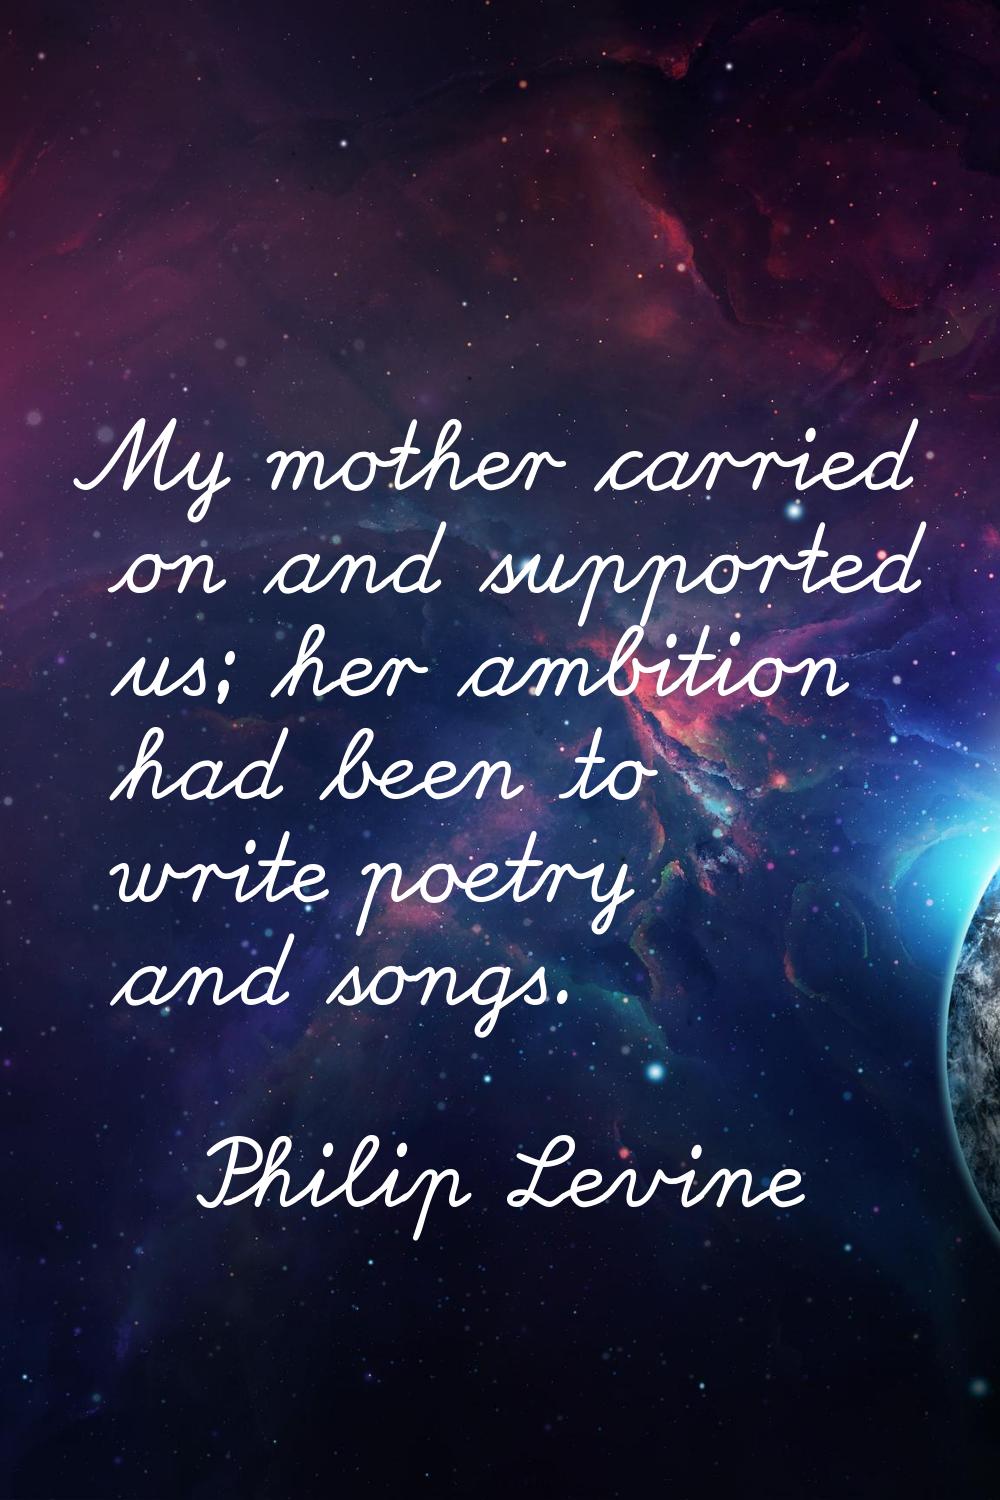 My mother carried on and supported us; her ambition had been to write poetry and songs.